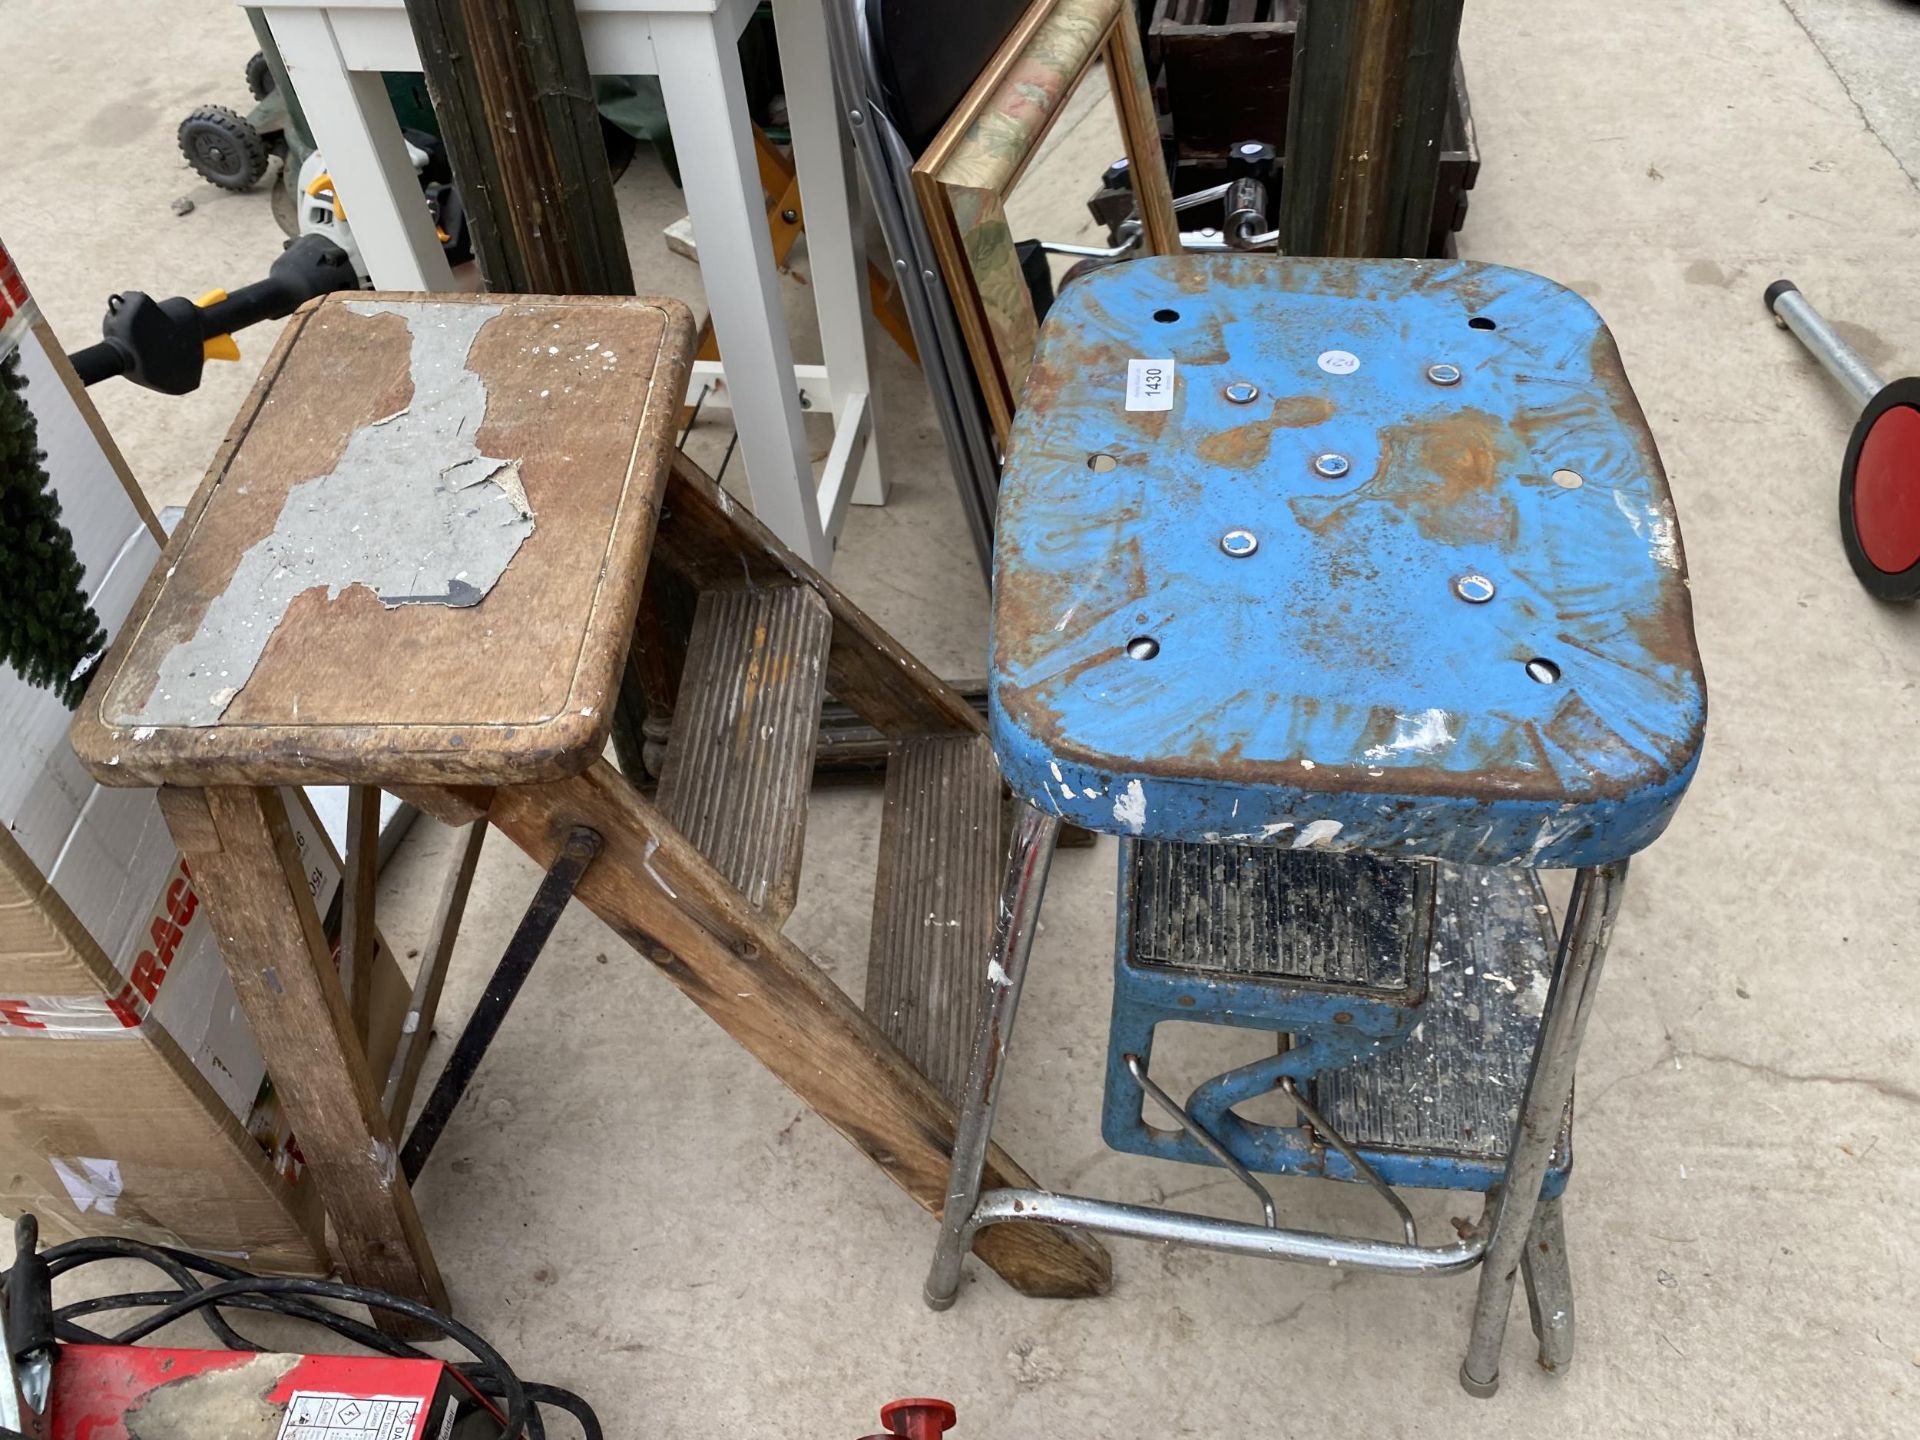 A VINTAGE WOODEN STEP STOOL AND A RETRO FOLDING STEP STOOL - Image 2 of 3